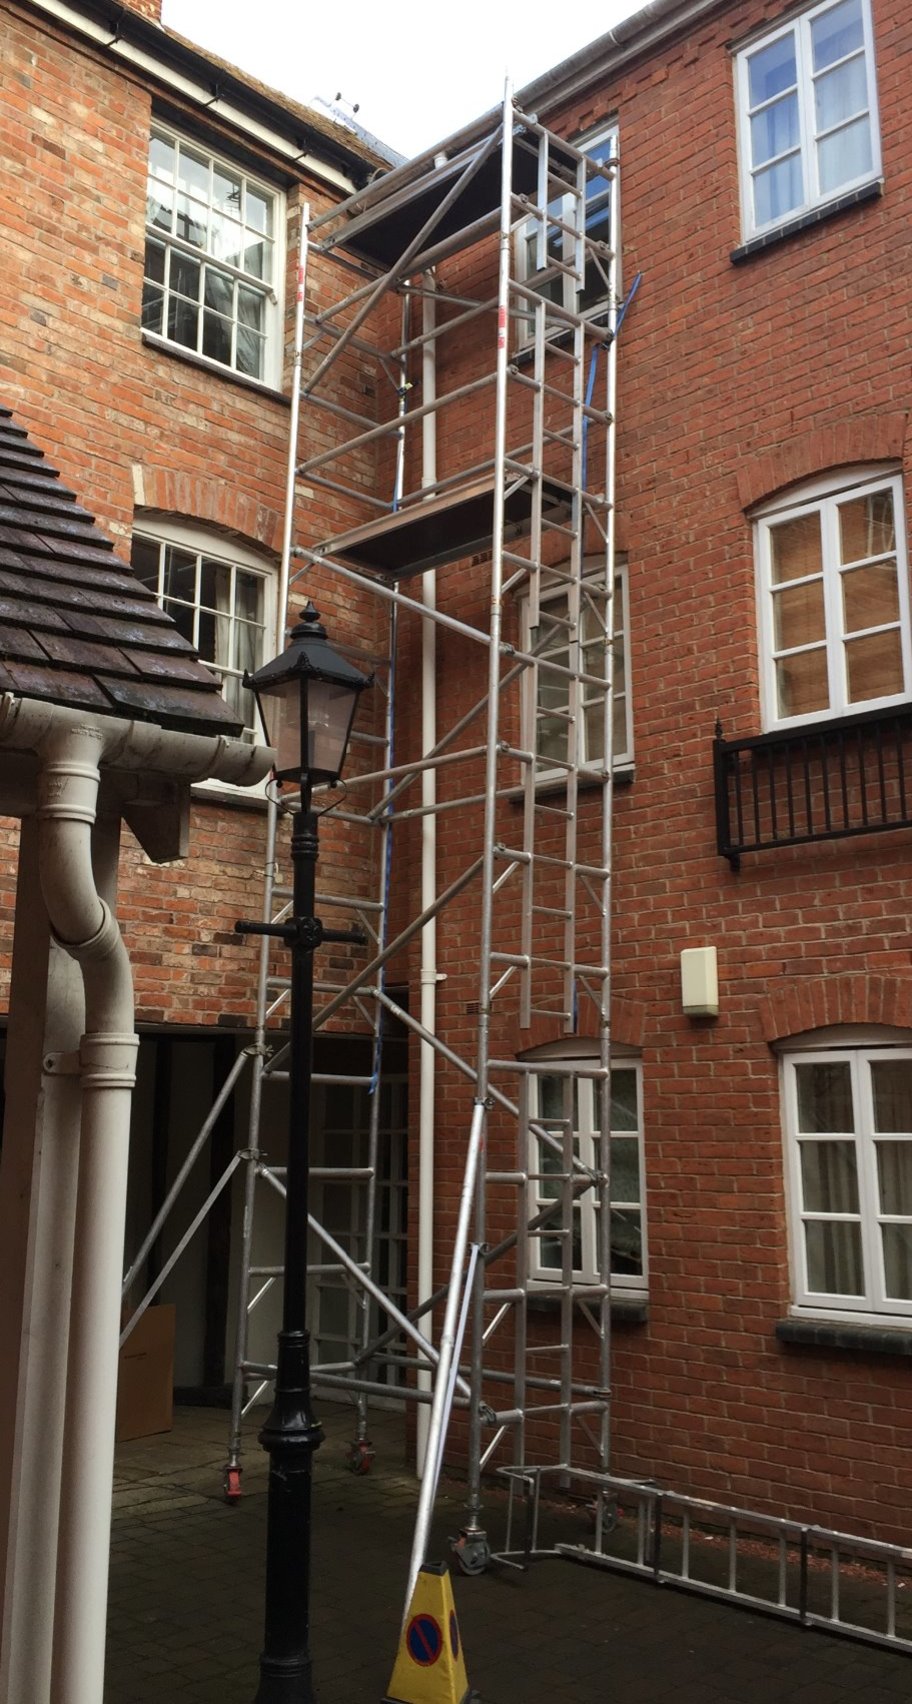 Safety scaffolding outside residential building for installer to use